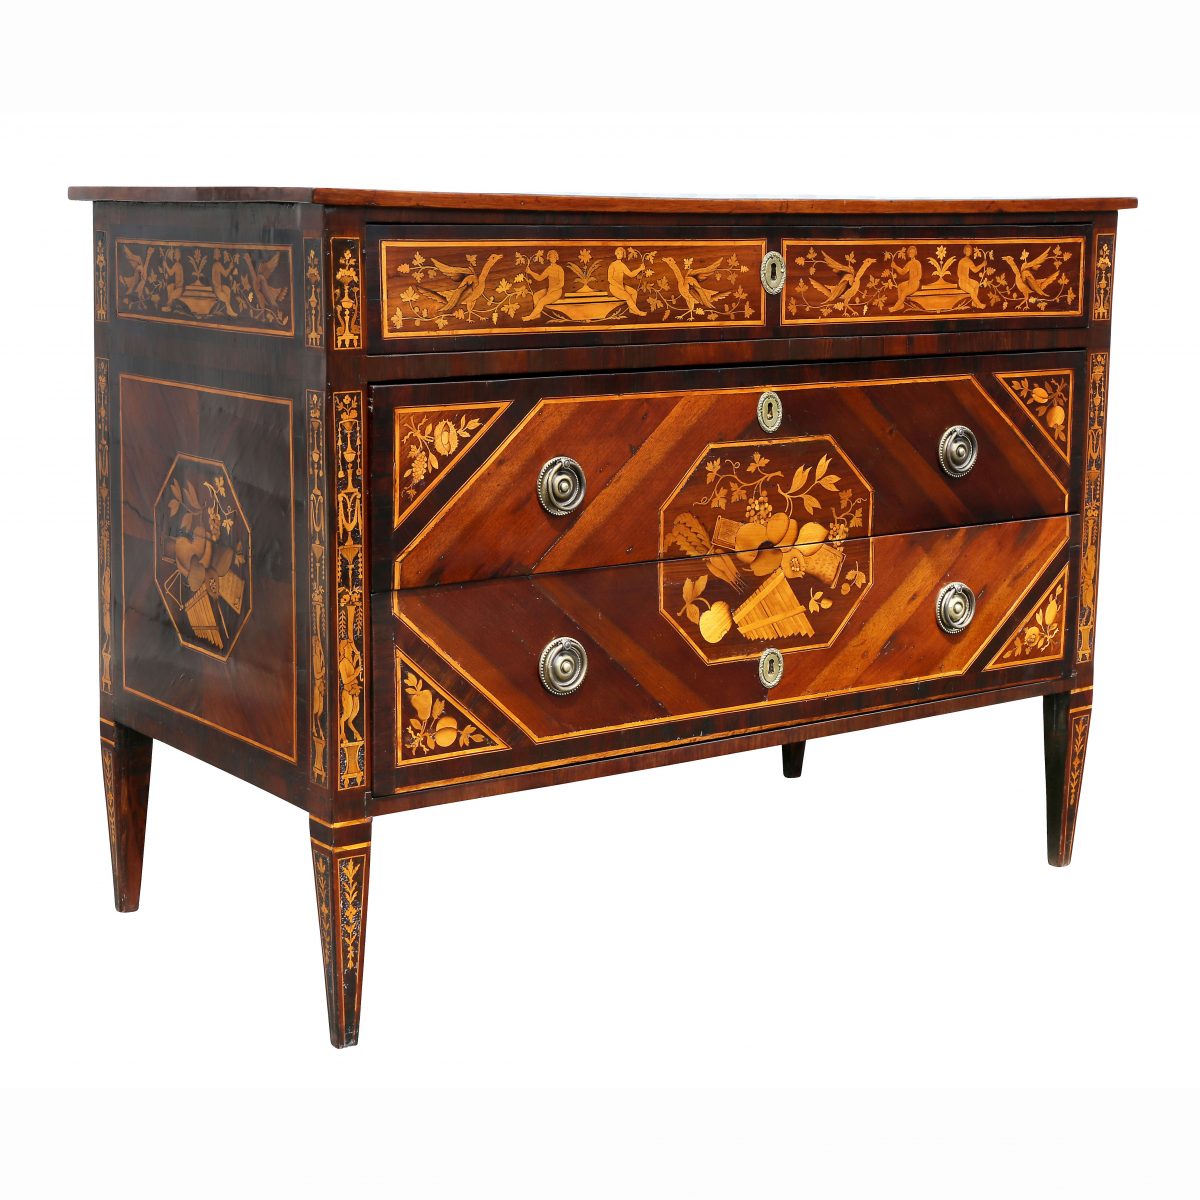 Italian Neoclassic Marquetry Inlaid Commode